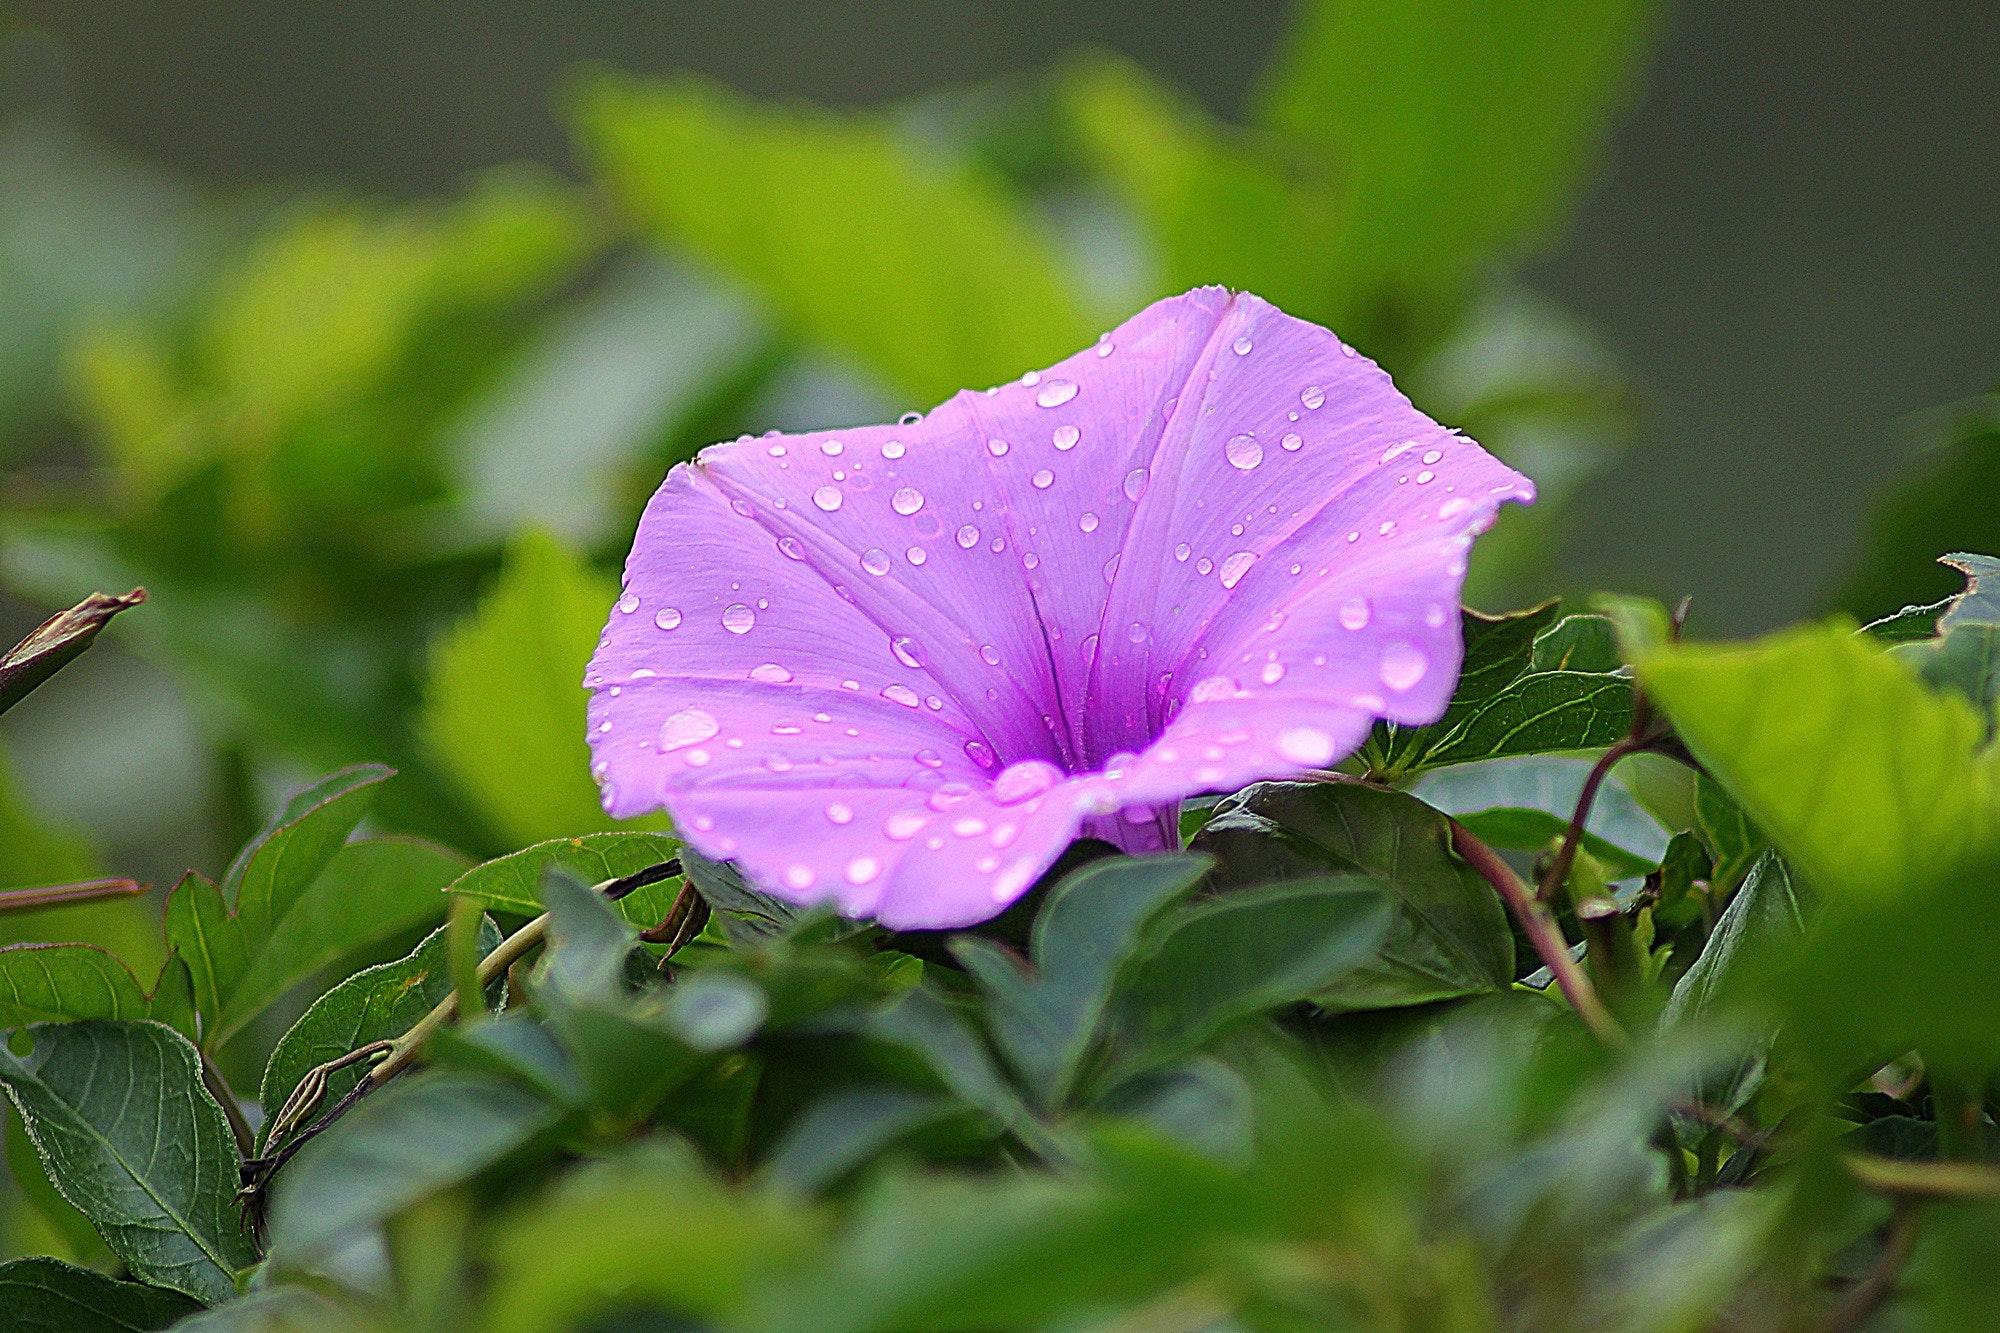 Purple petal flower surrounded by green plants during daytime photo